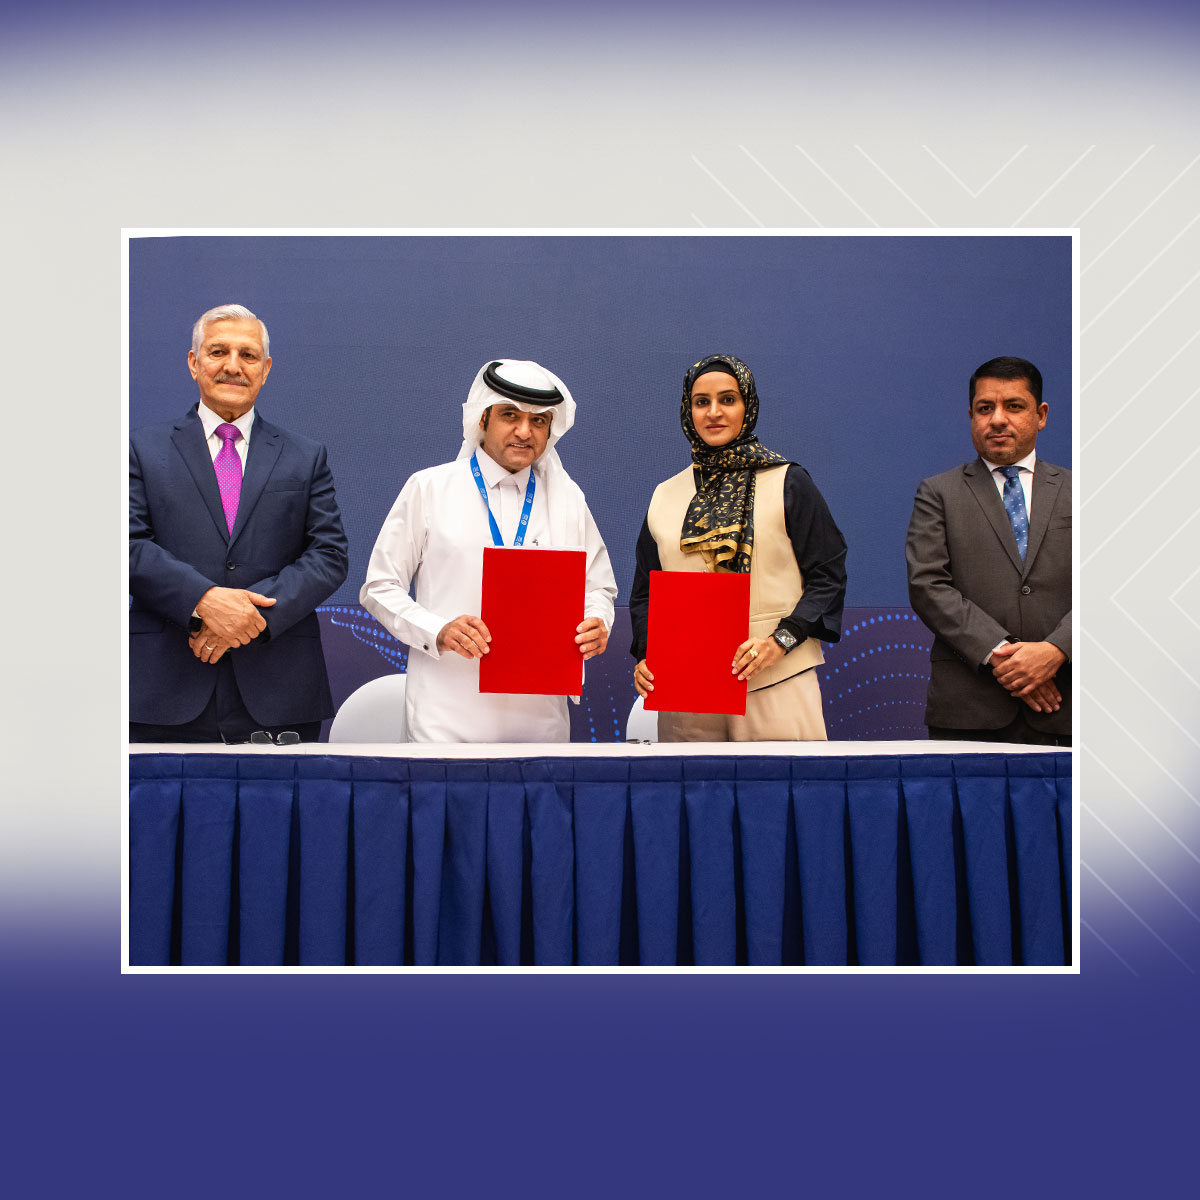 Kingdom University and the Bahrain Society for Human Capital Management signed a cooperation agreement